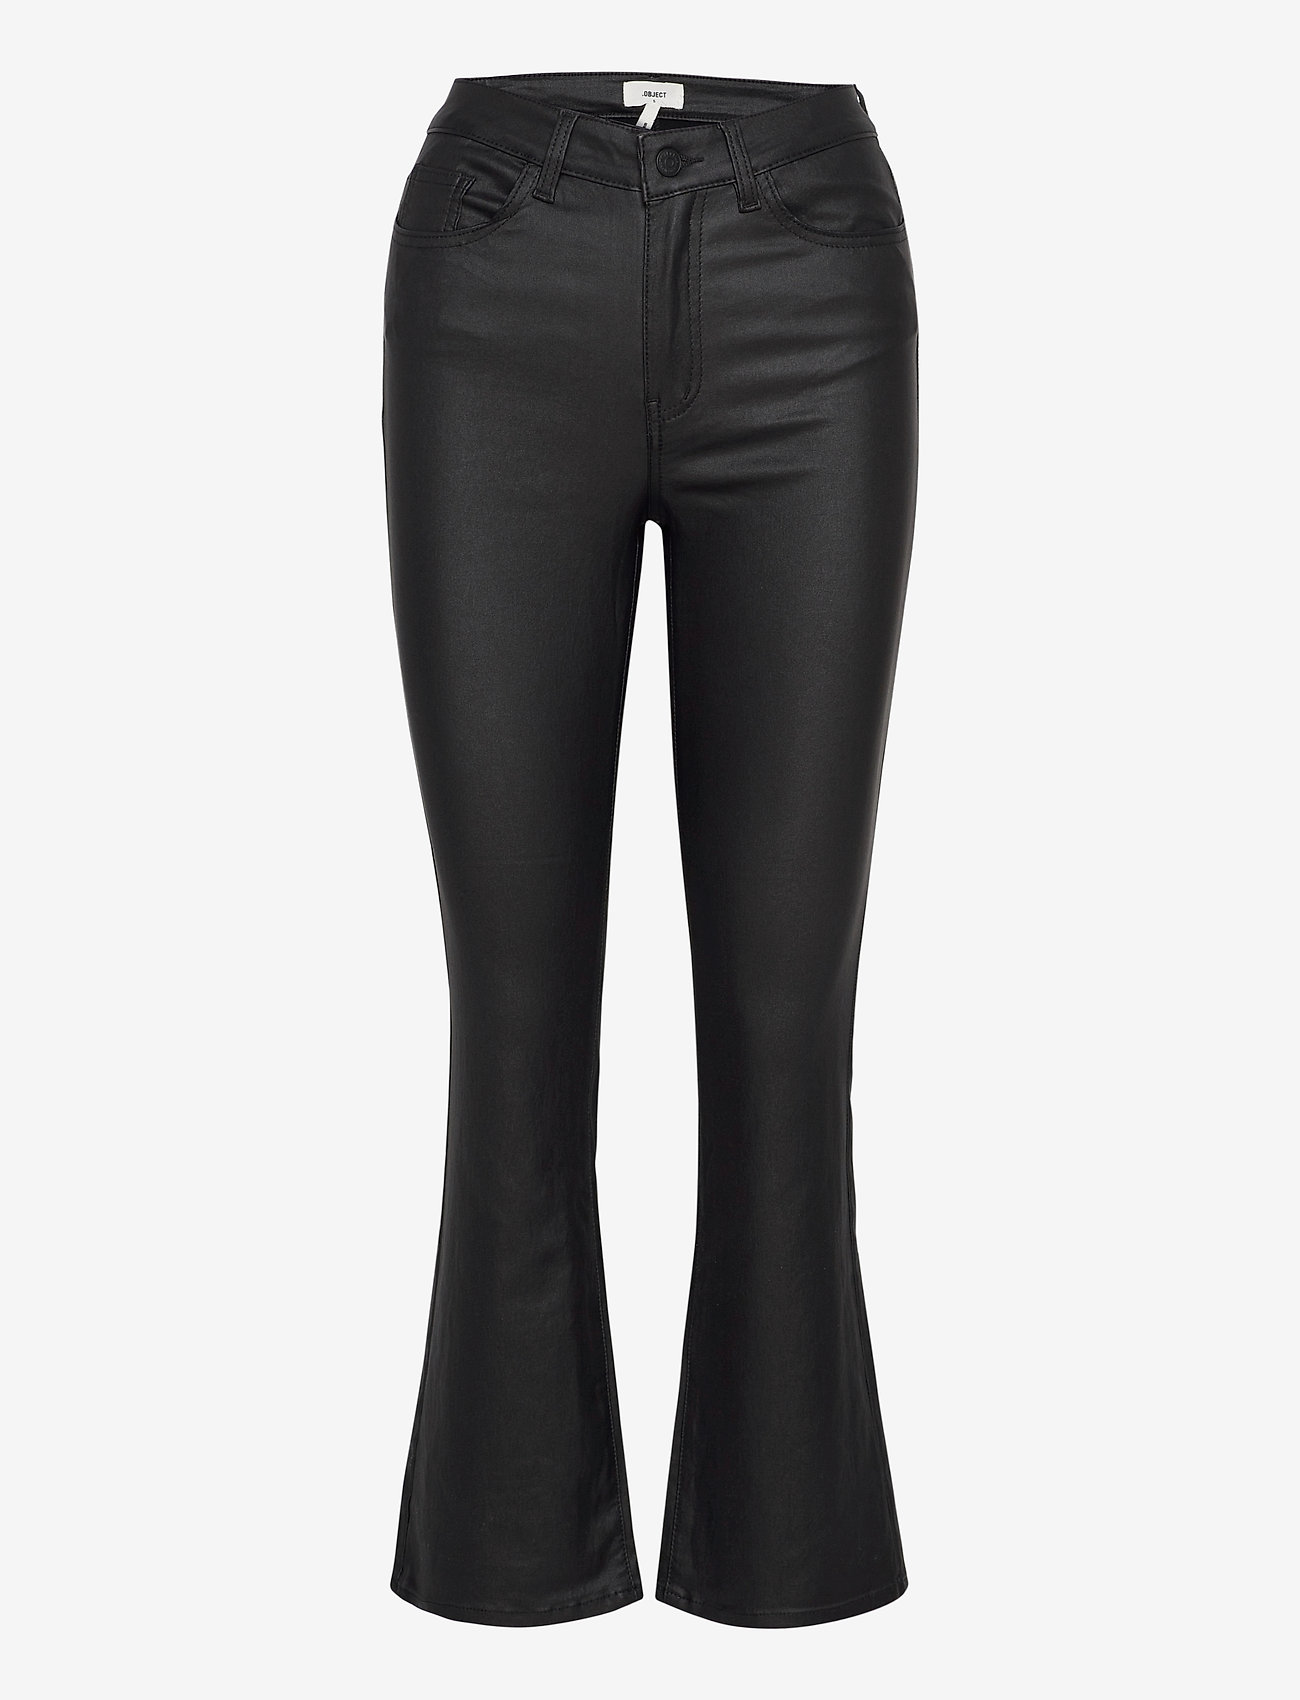 Object Objbelle Mw 7/8 Coated Flared Pant - Jeans | Boozt.com